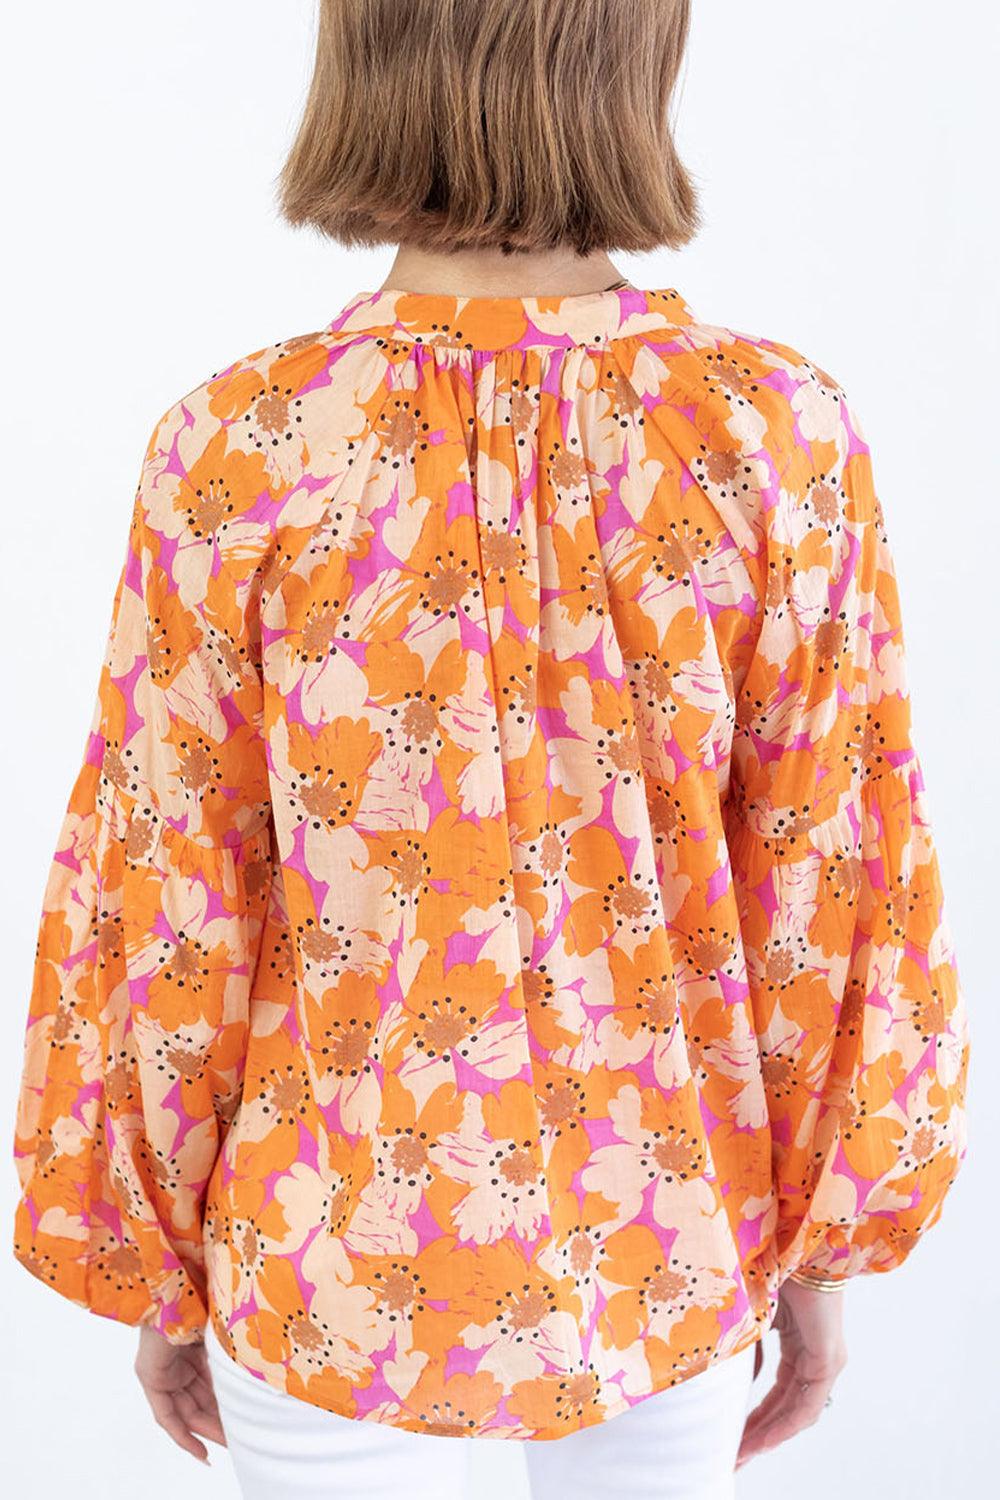 Floral Print Blouse: Embrace Your Feminine Side! Buy Now